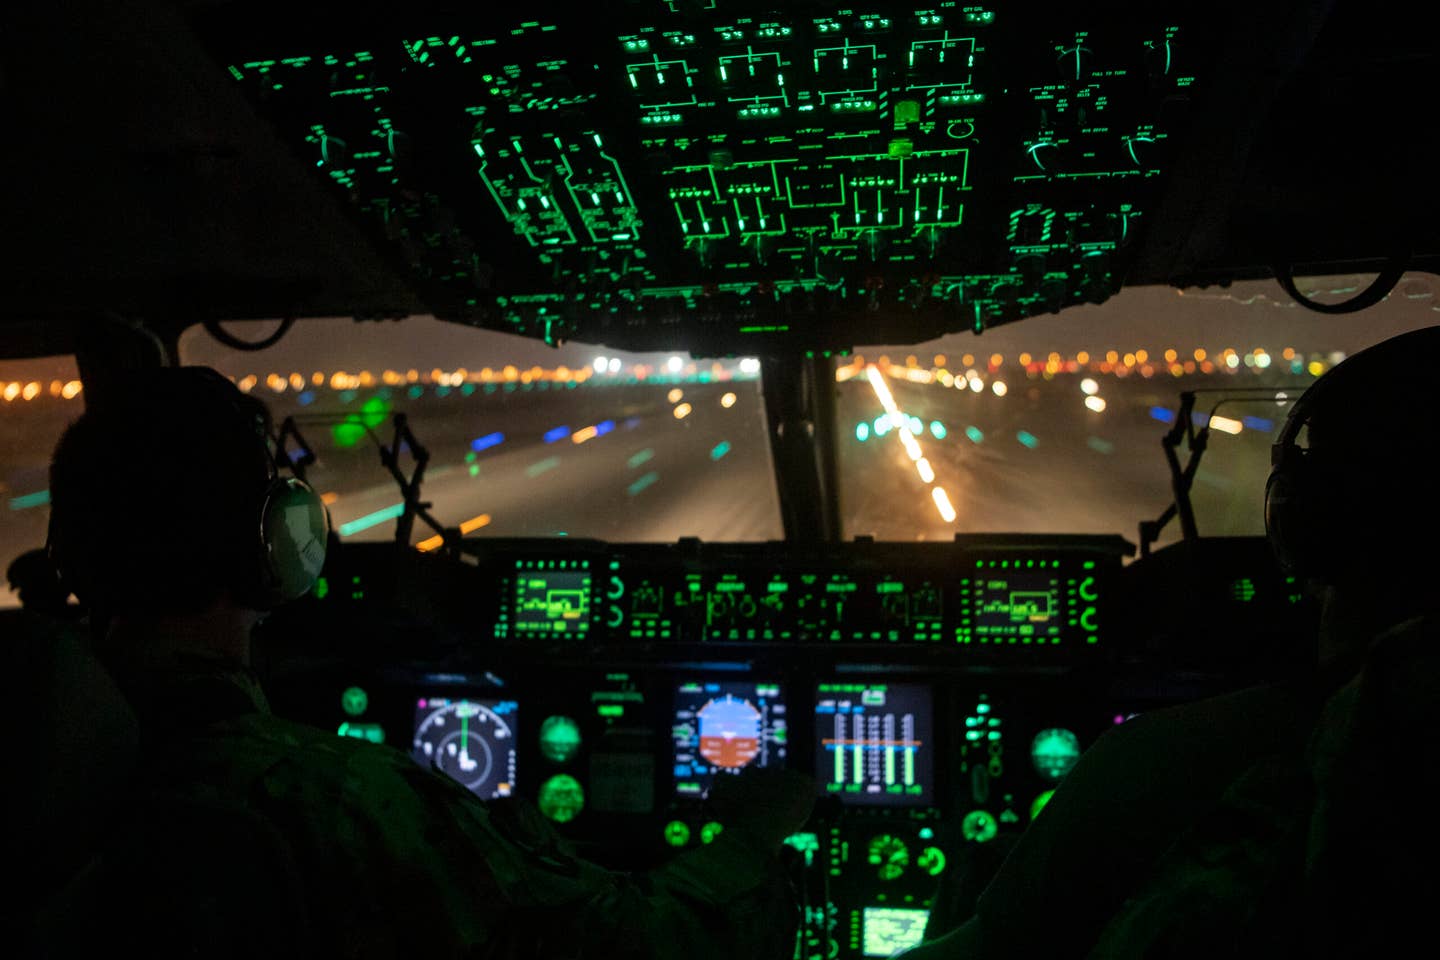 U.S. Air Force C-17 Globemaster III pilots, assigned to the 816th Expeditionary Airlift Squadron, takeoff for a mission at Al Udeid Air Base, Qatar, Oct. 27, 2020.  (U.S. Air Force photo by Master Sgt. Larry E. Reid Jr.)